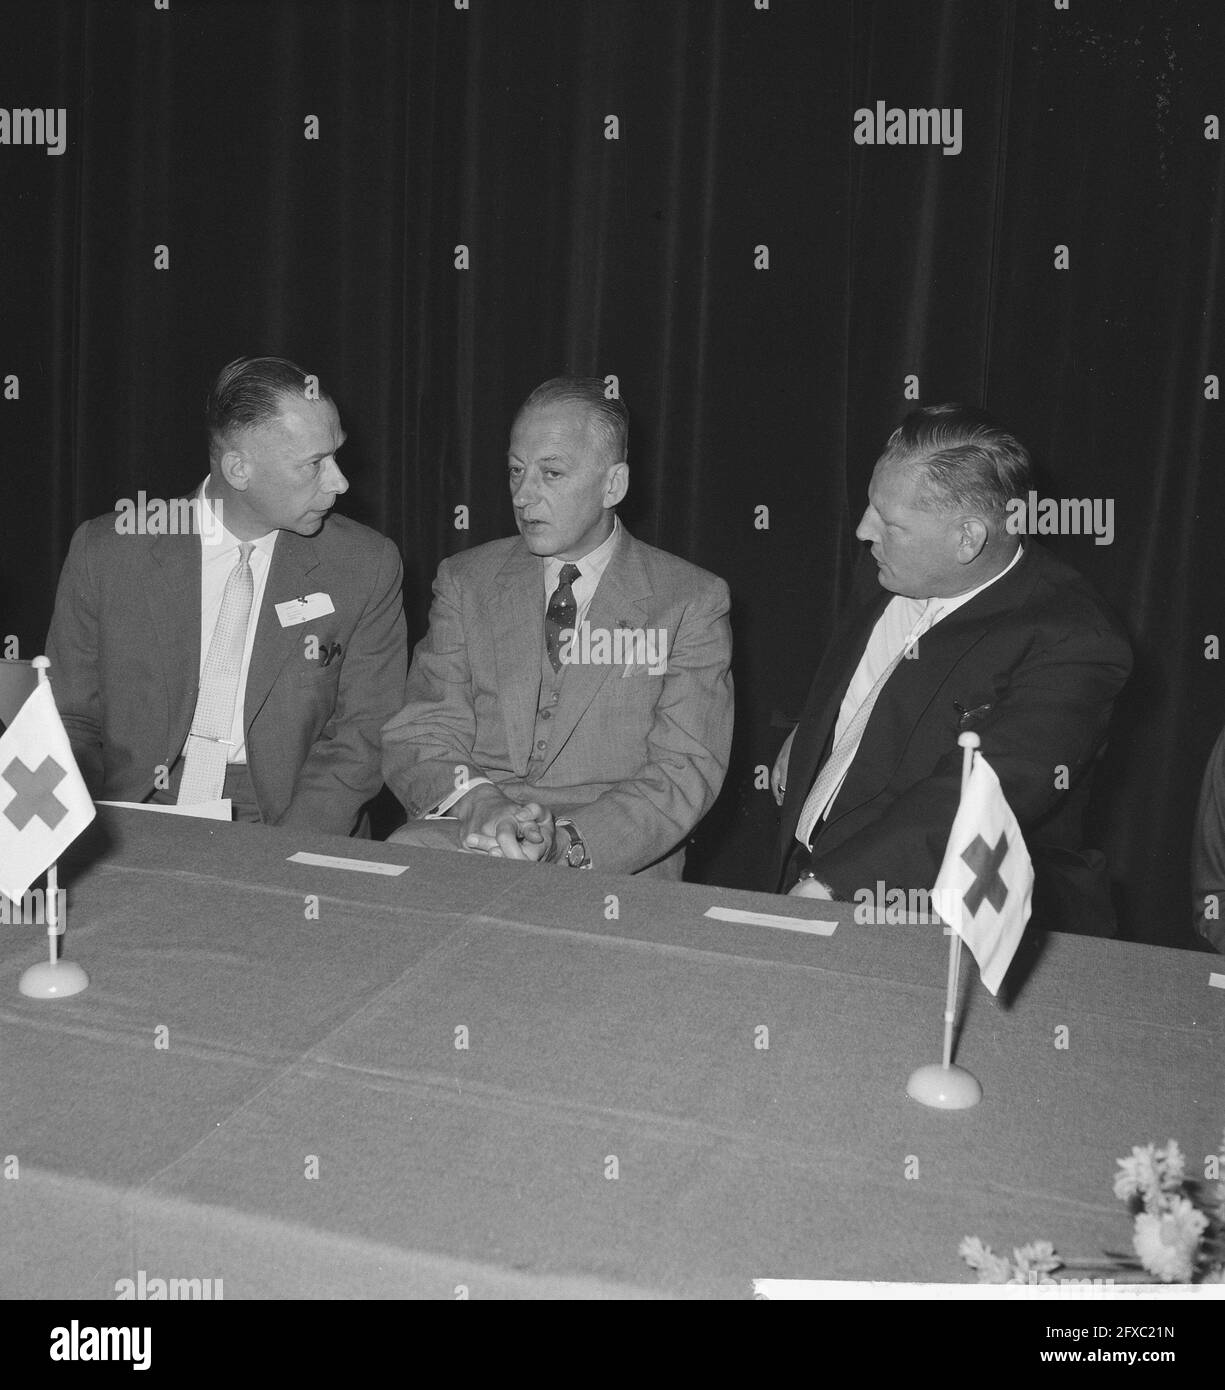 Jubilee 50 years Green Cross in Utrecht. Jhr. De Ranitz, dr. Navis and mr. van Gelder, 30 October 1961, jubilees, The Netherlands, 20th century press agency photo, news to remember, documentary, historic photography 1945-1990, visual stories, human history of the Twentieth Century, capturing moments in time Stock Photo